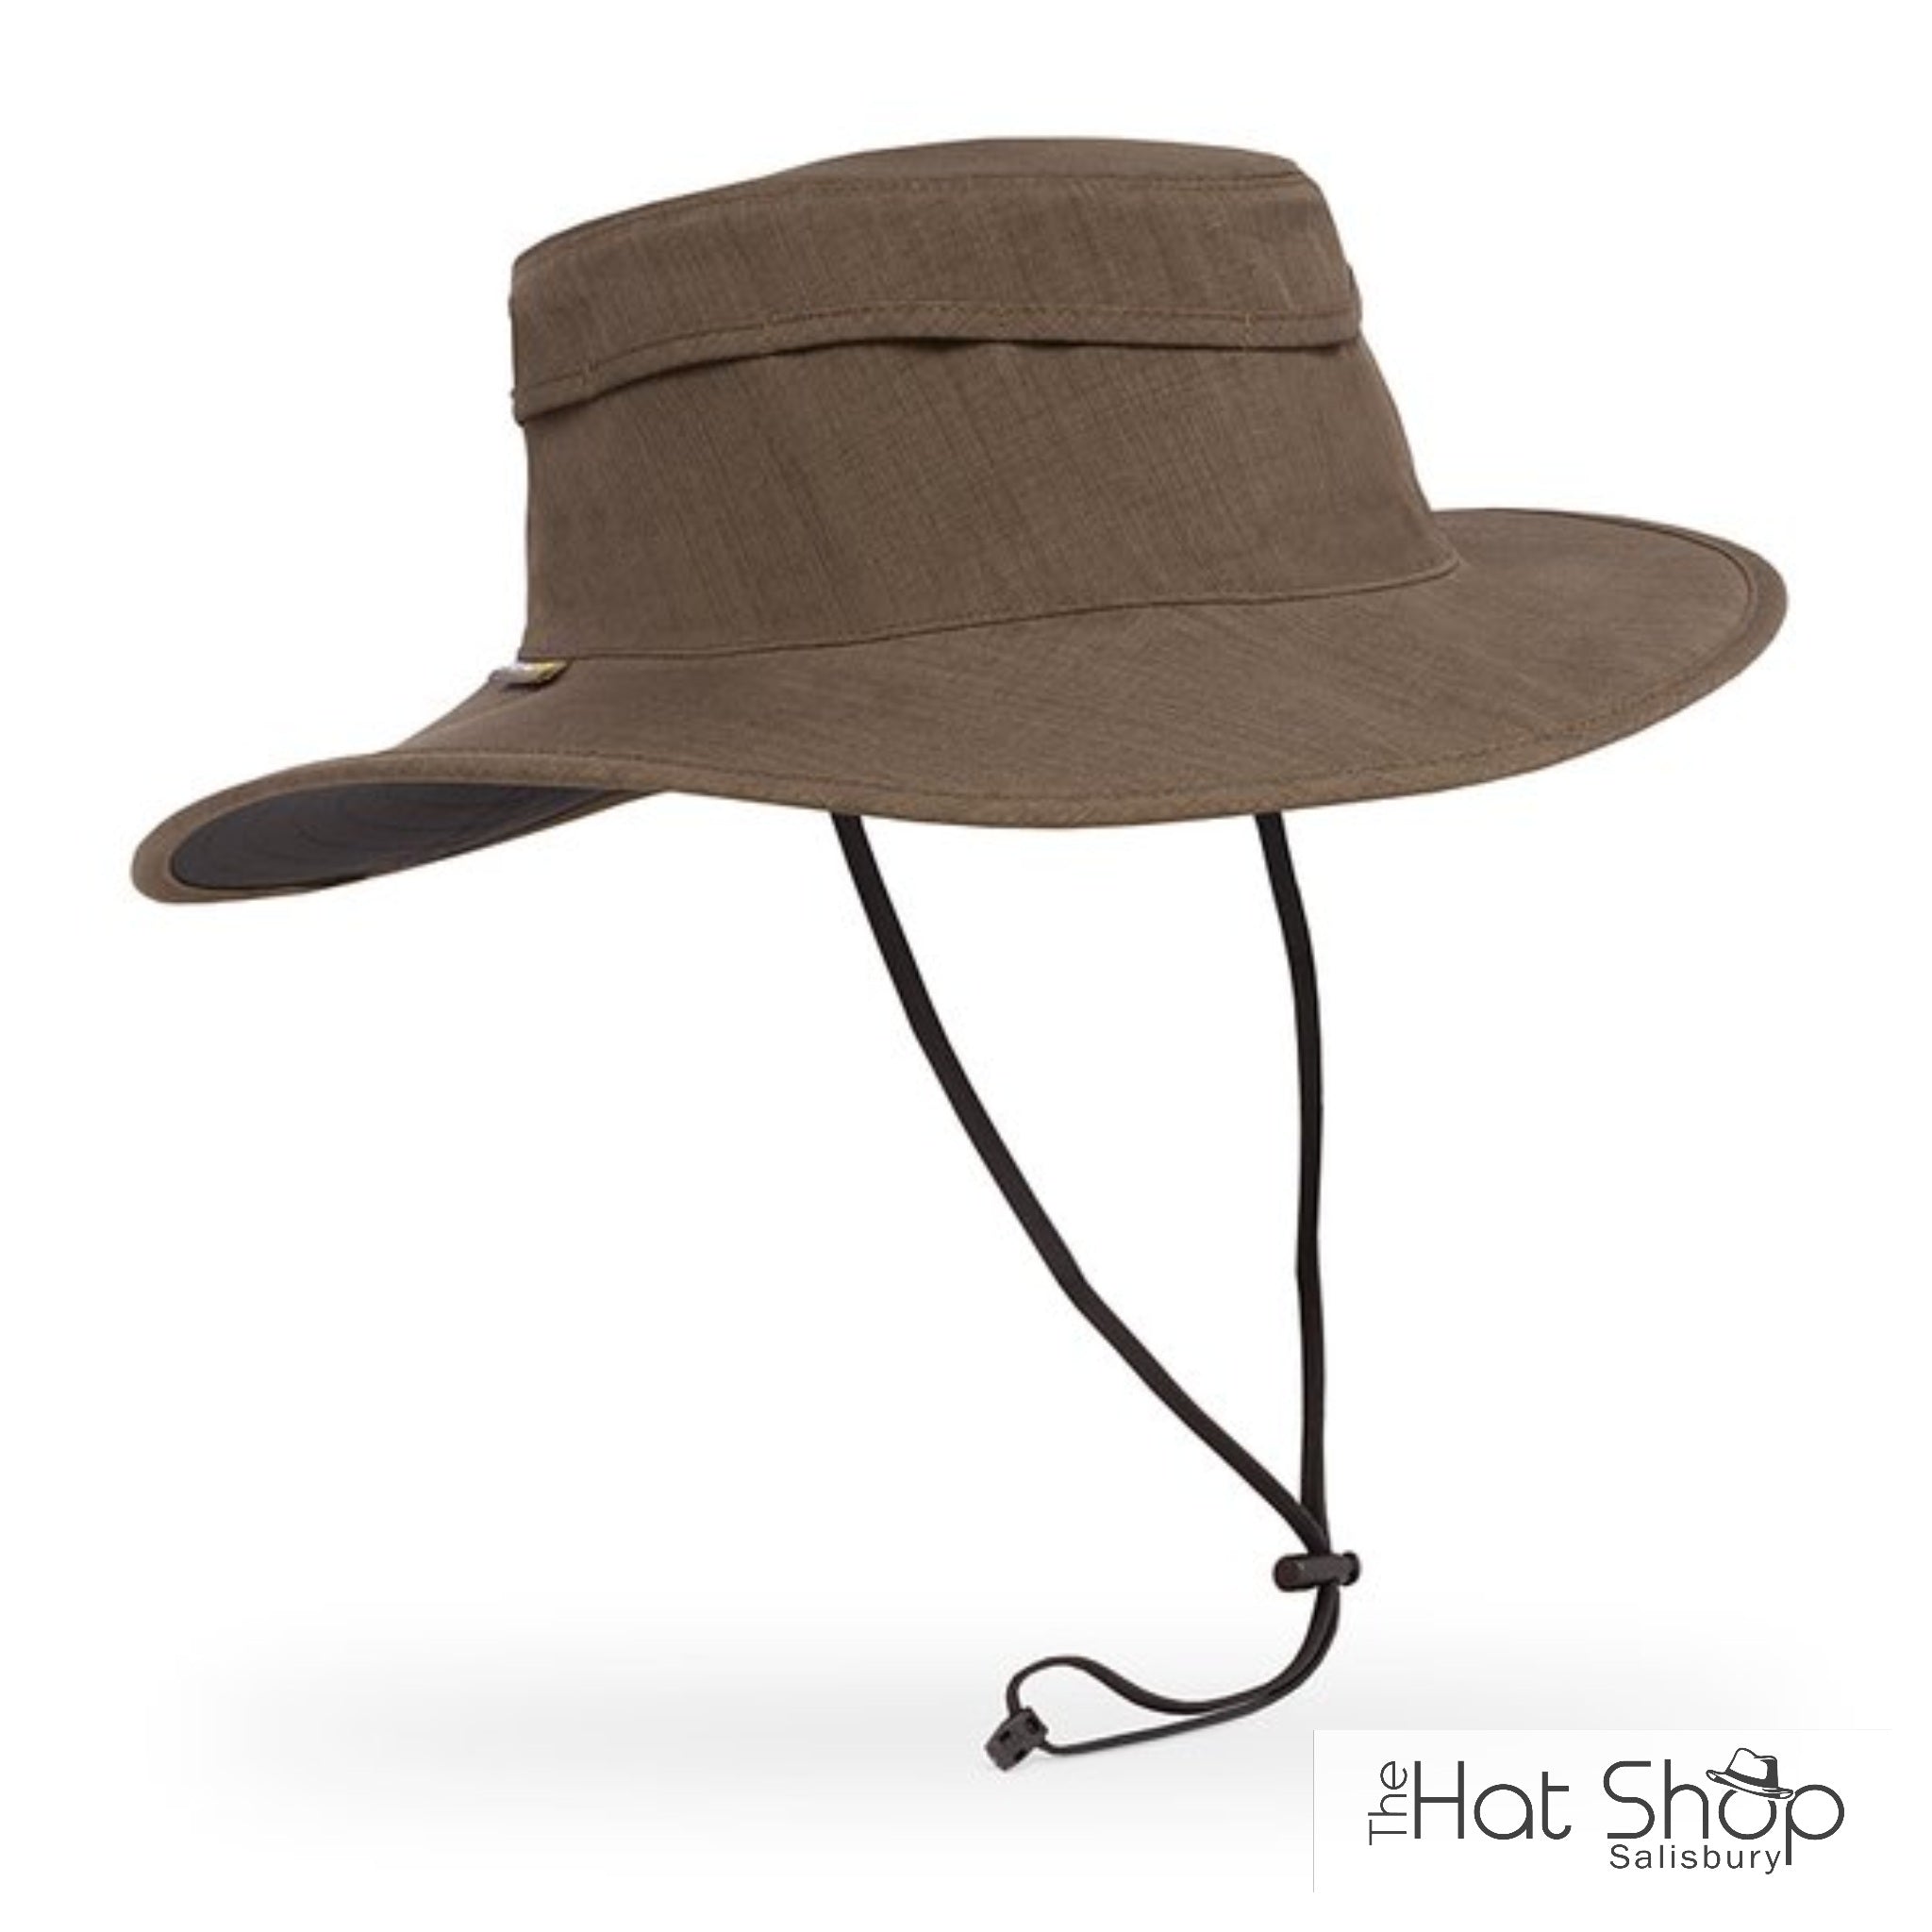 The Hat Shop Sunday Afternoons Rain Shadow Hat